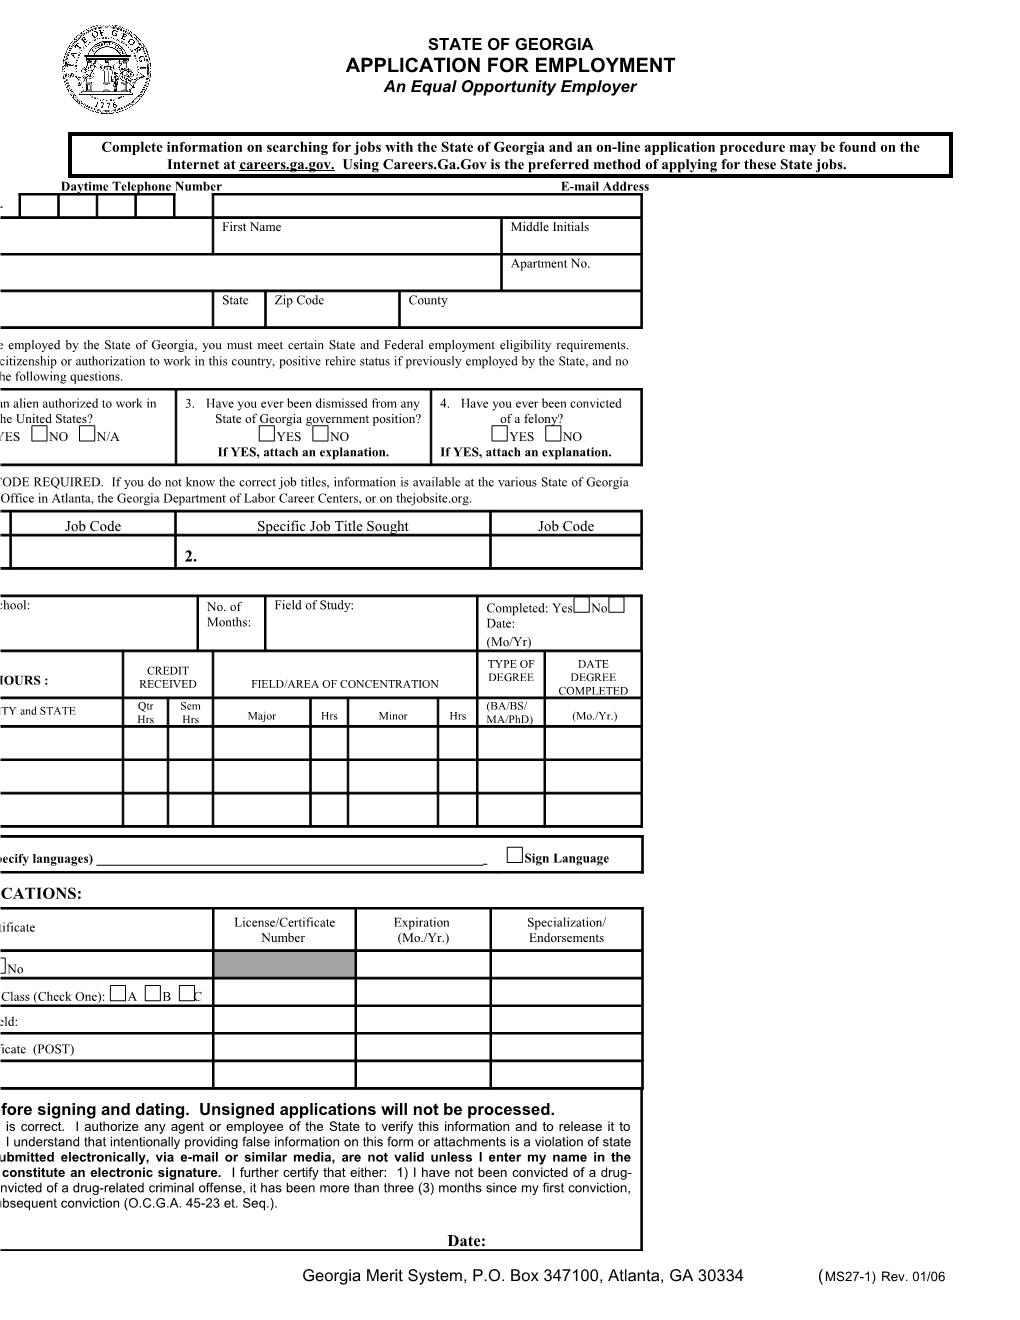 Application for Regular State Employment